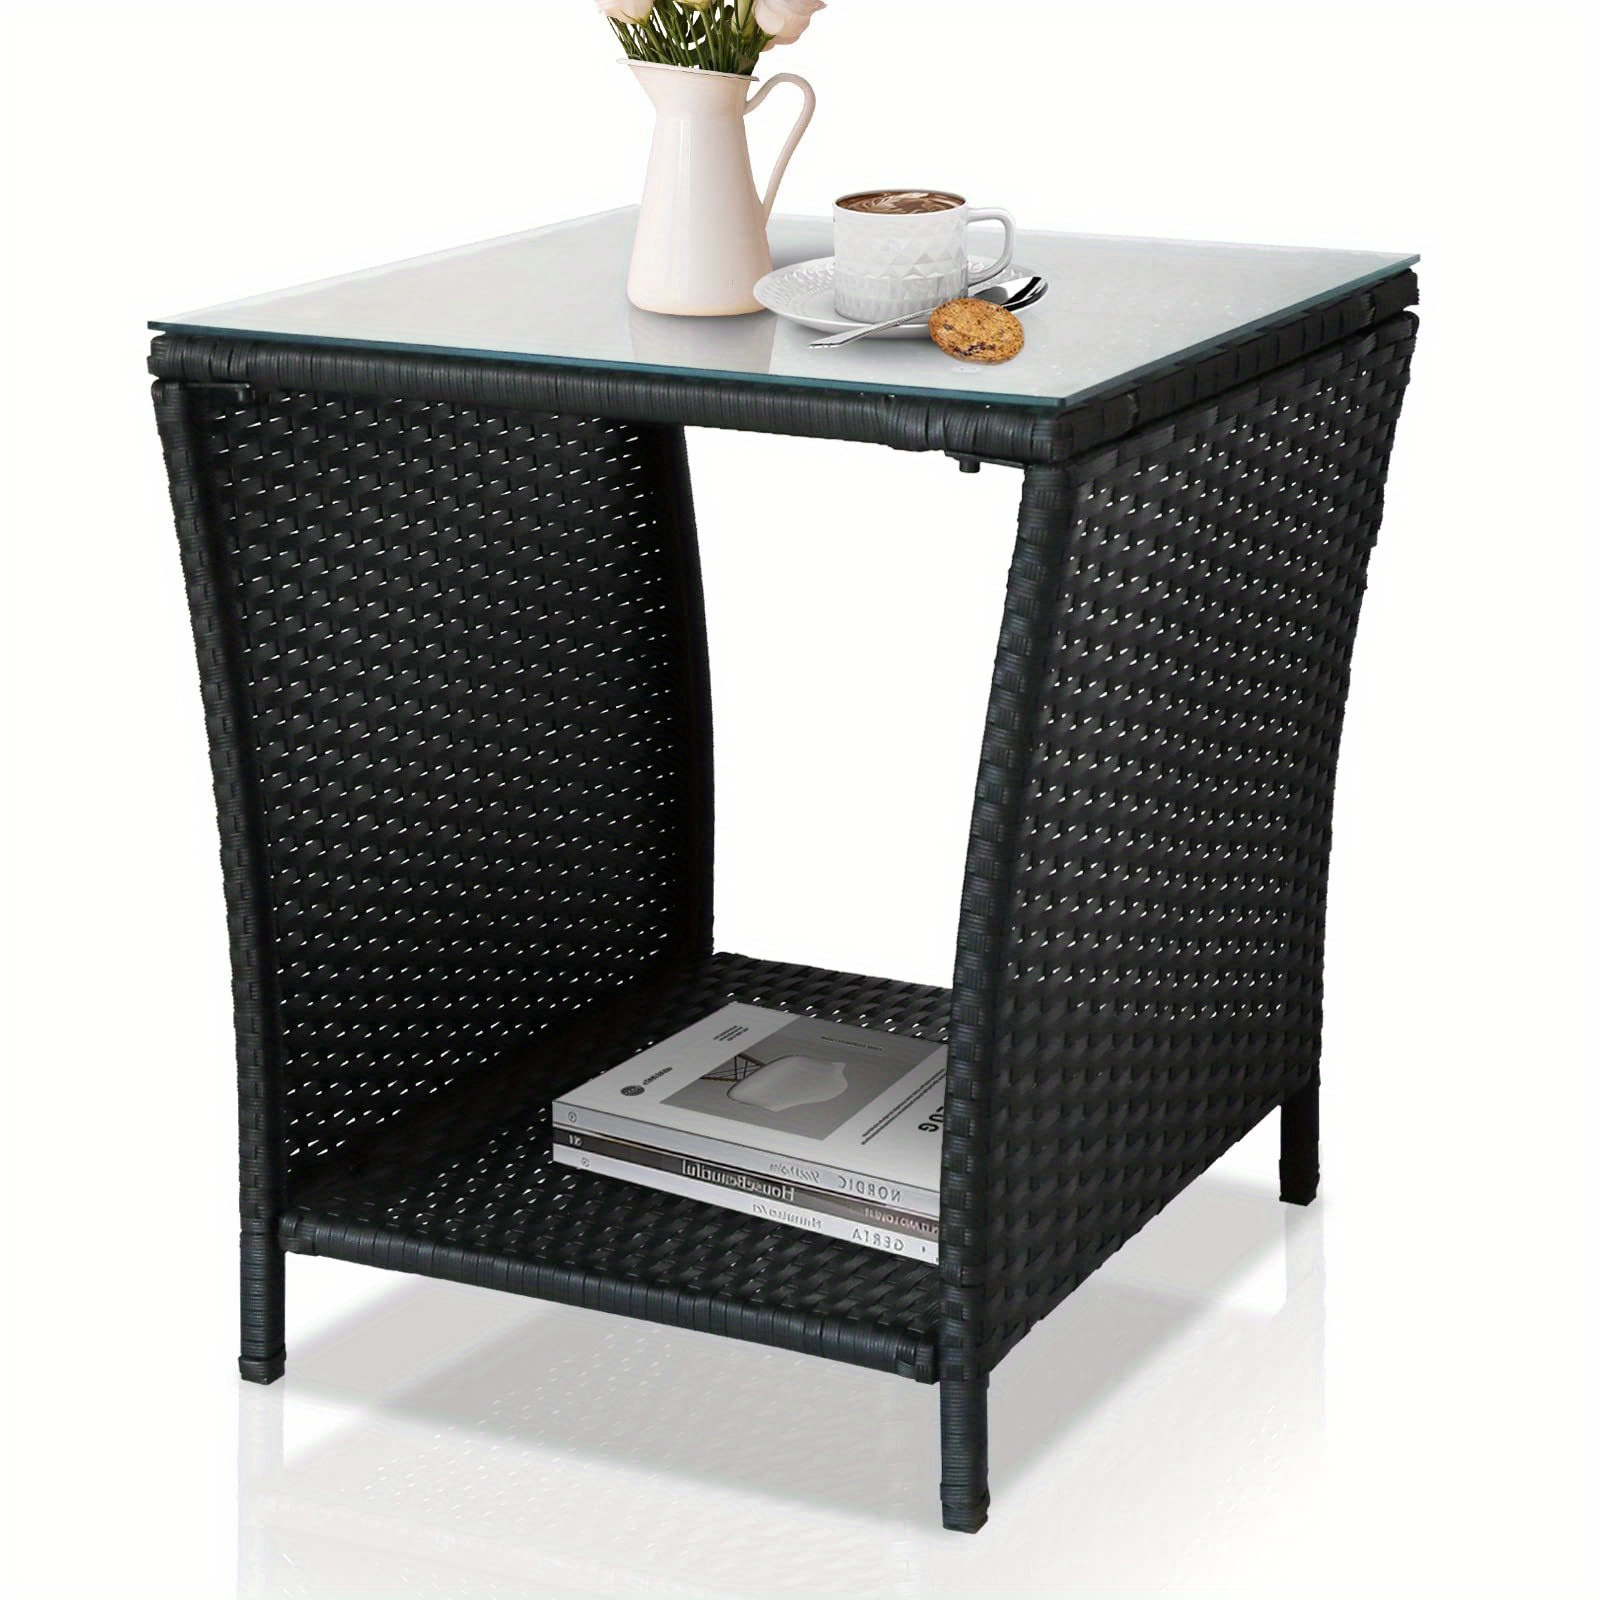 

Outdoor Patio Wicker End Table Square Side Bistro Coffee Table With Glass Top Storage Shelf For Garden Lawn Backyard